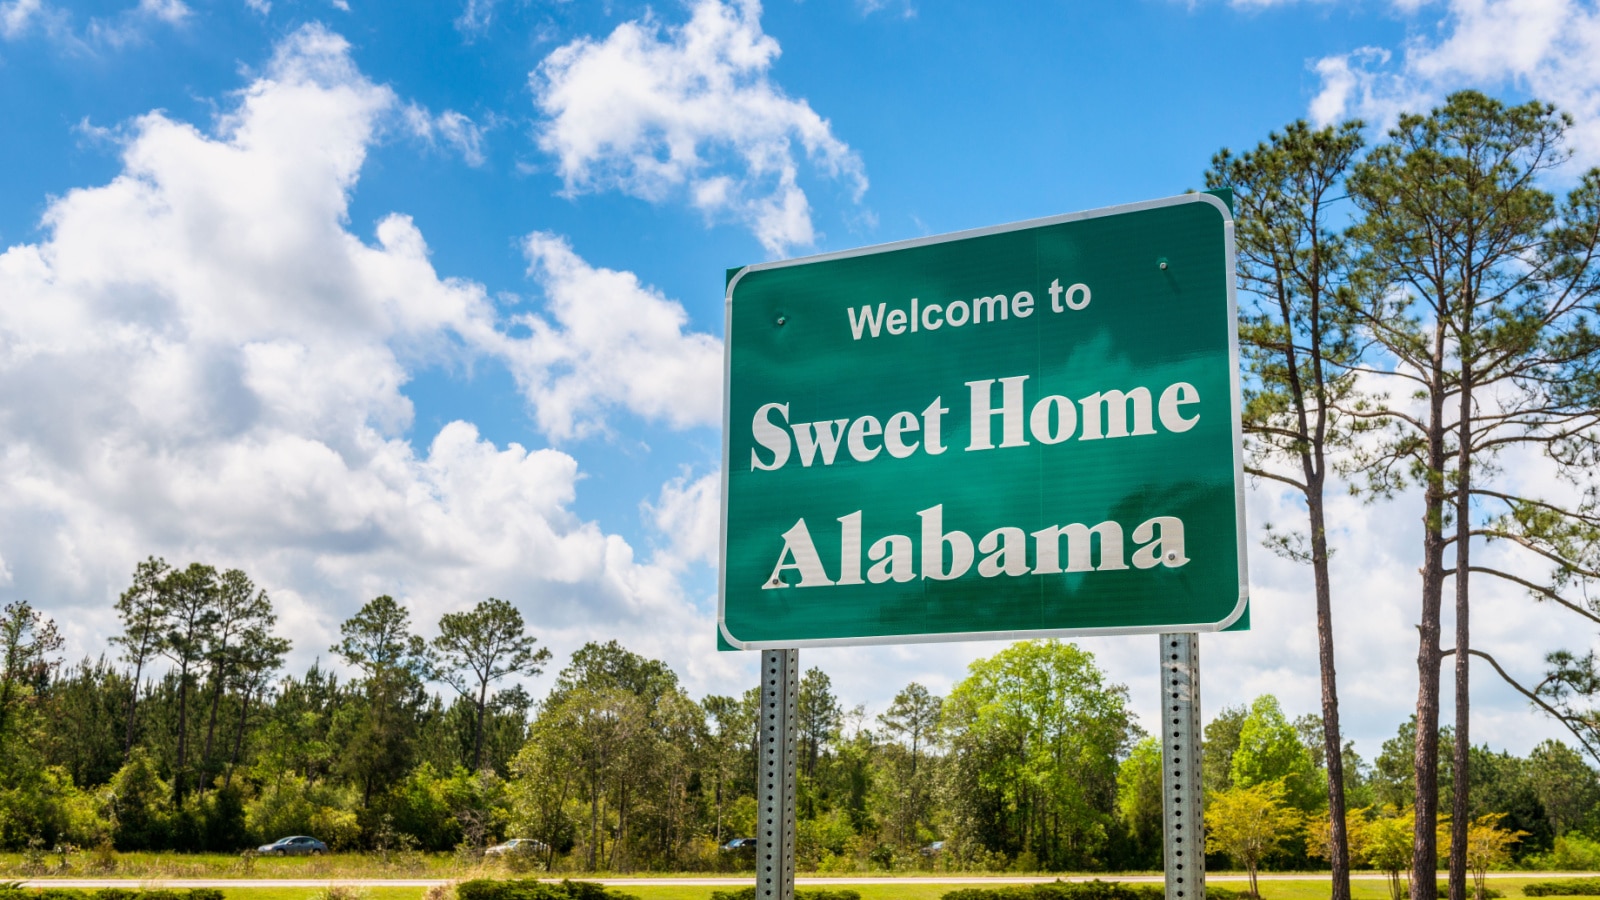 <p><span>Alabama doesn’t impress this American who believes it’s the worst state to visit due to poor infrastructure, lack of culture, and tourist attractions. Additionally, the state’s roads and transportation systems need improvement, further solidifying this user’s opinion to skip Alabama altogether.</span></p> <p>Source: <a href="https://www.reddit.com/r/AskReddit/comments/qa3inu/americans_whats_the_worst_state_to_visit_and_why/" rel="noreferrer noopener">Reddit</a></p>